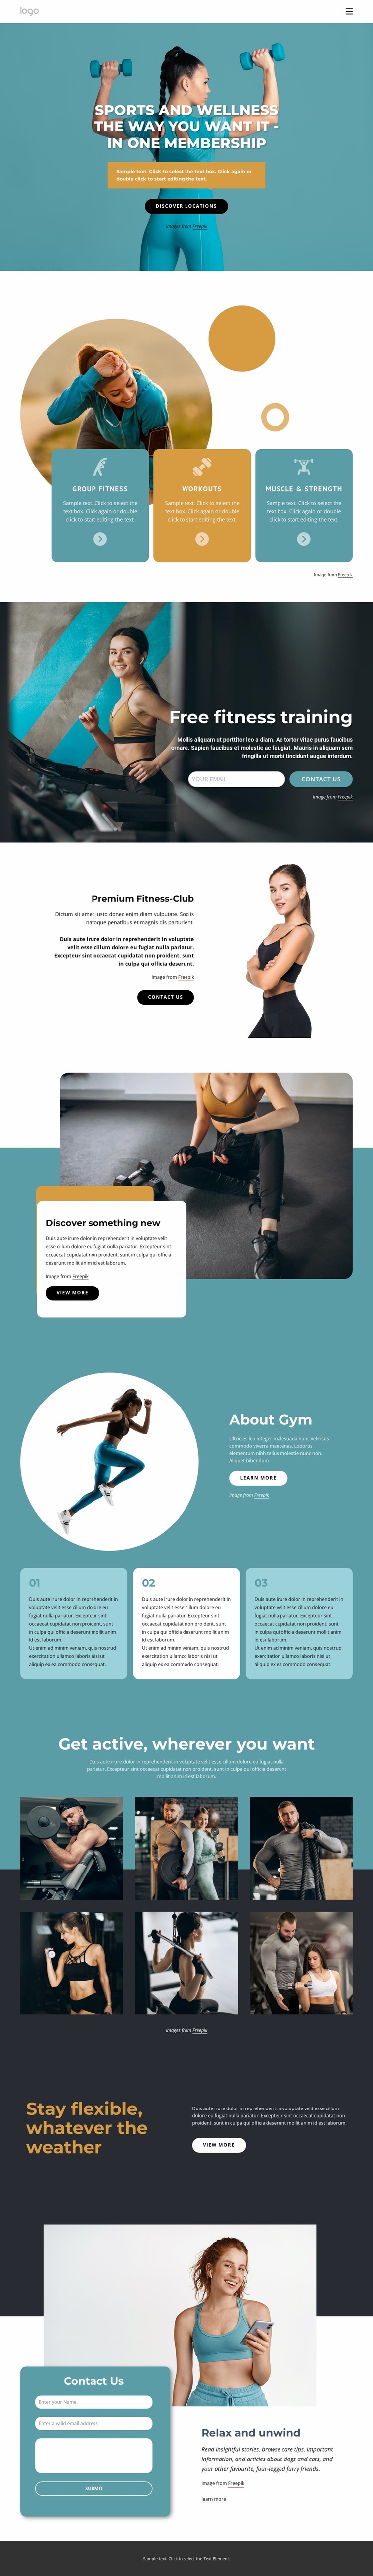 Workout anywhere with one membership Website Design